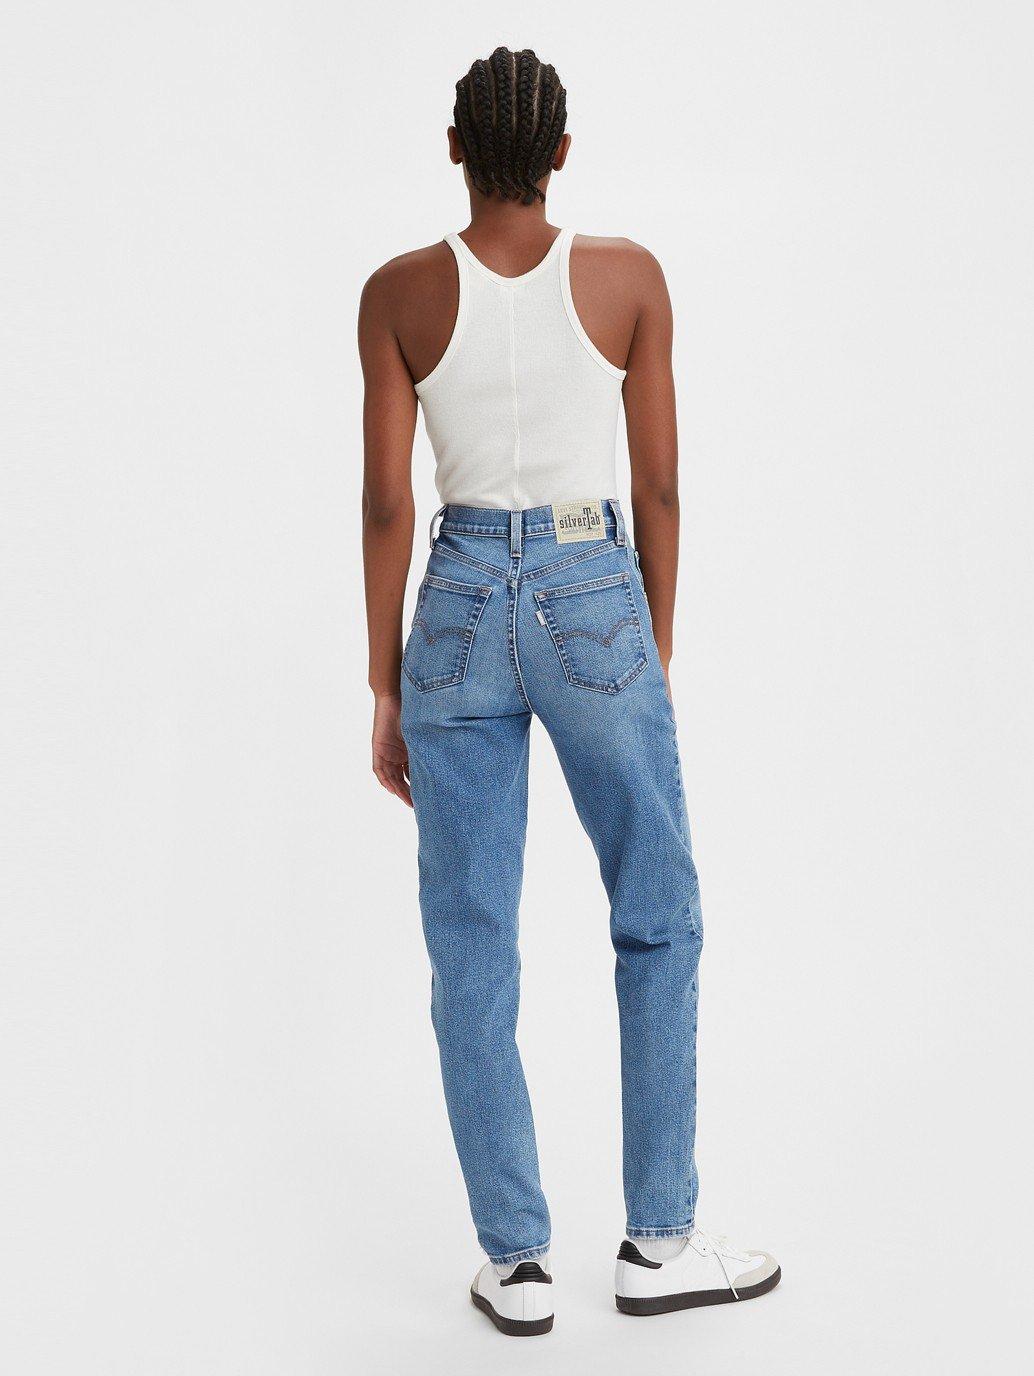 Buy Levi's® Women's SilverTab™ High Waisted Mom Jeans | Levi’s ...